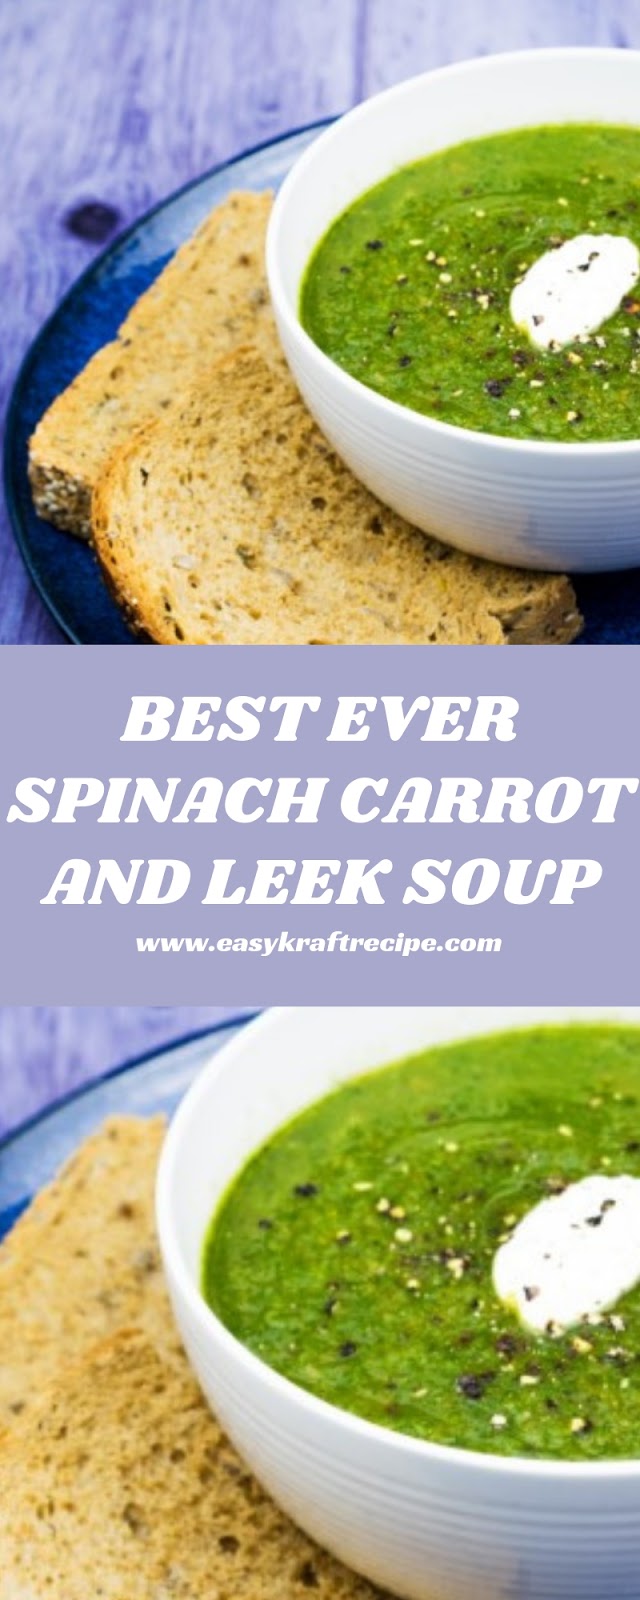 BEST EVER SPINACH CARROT AND LEEK SOUP